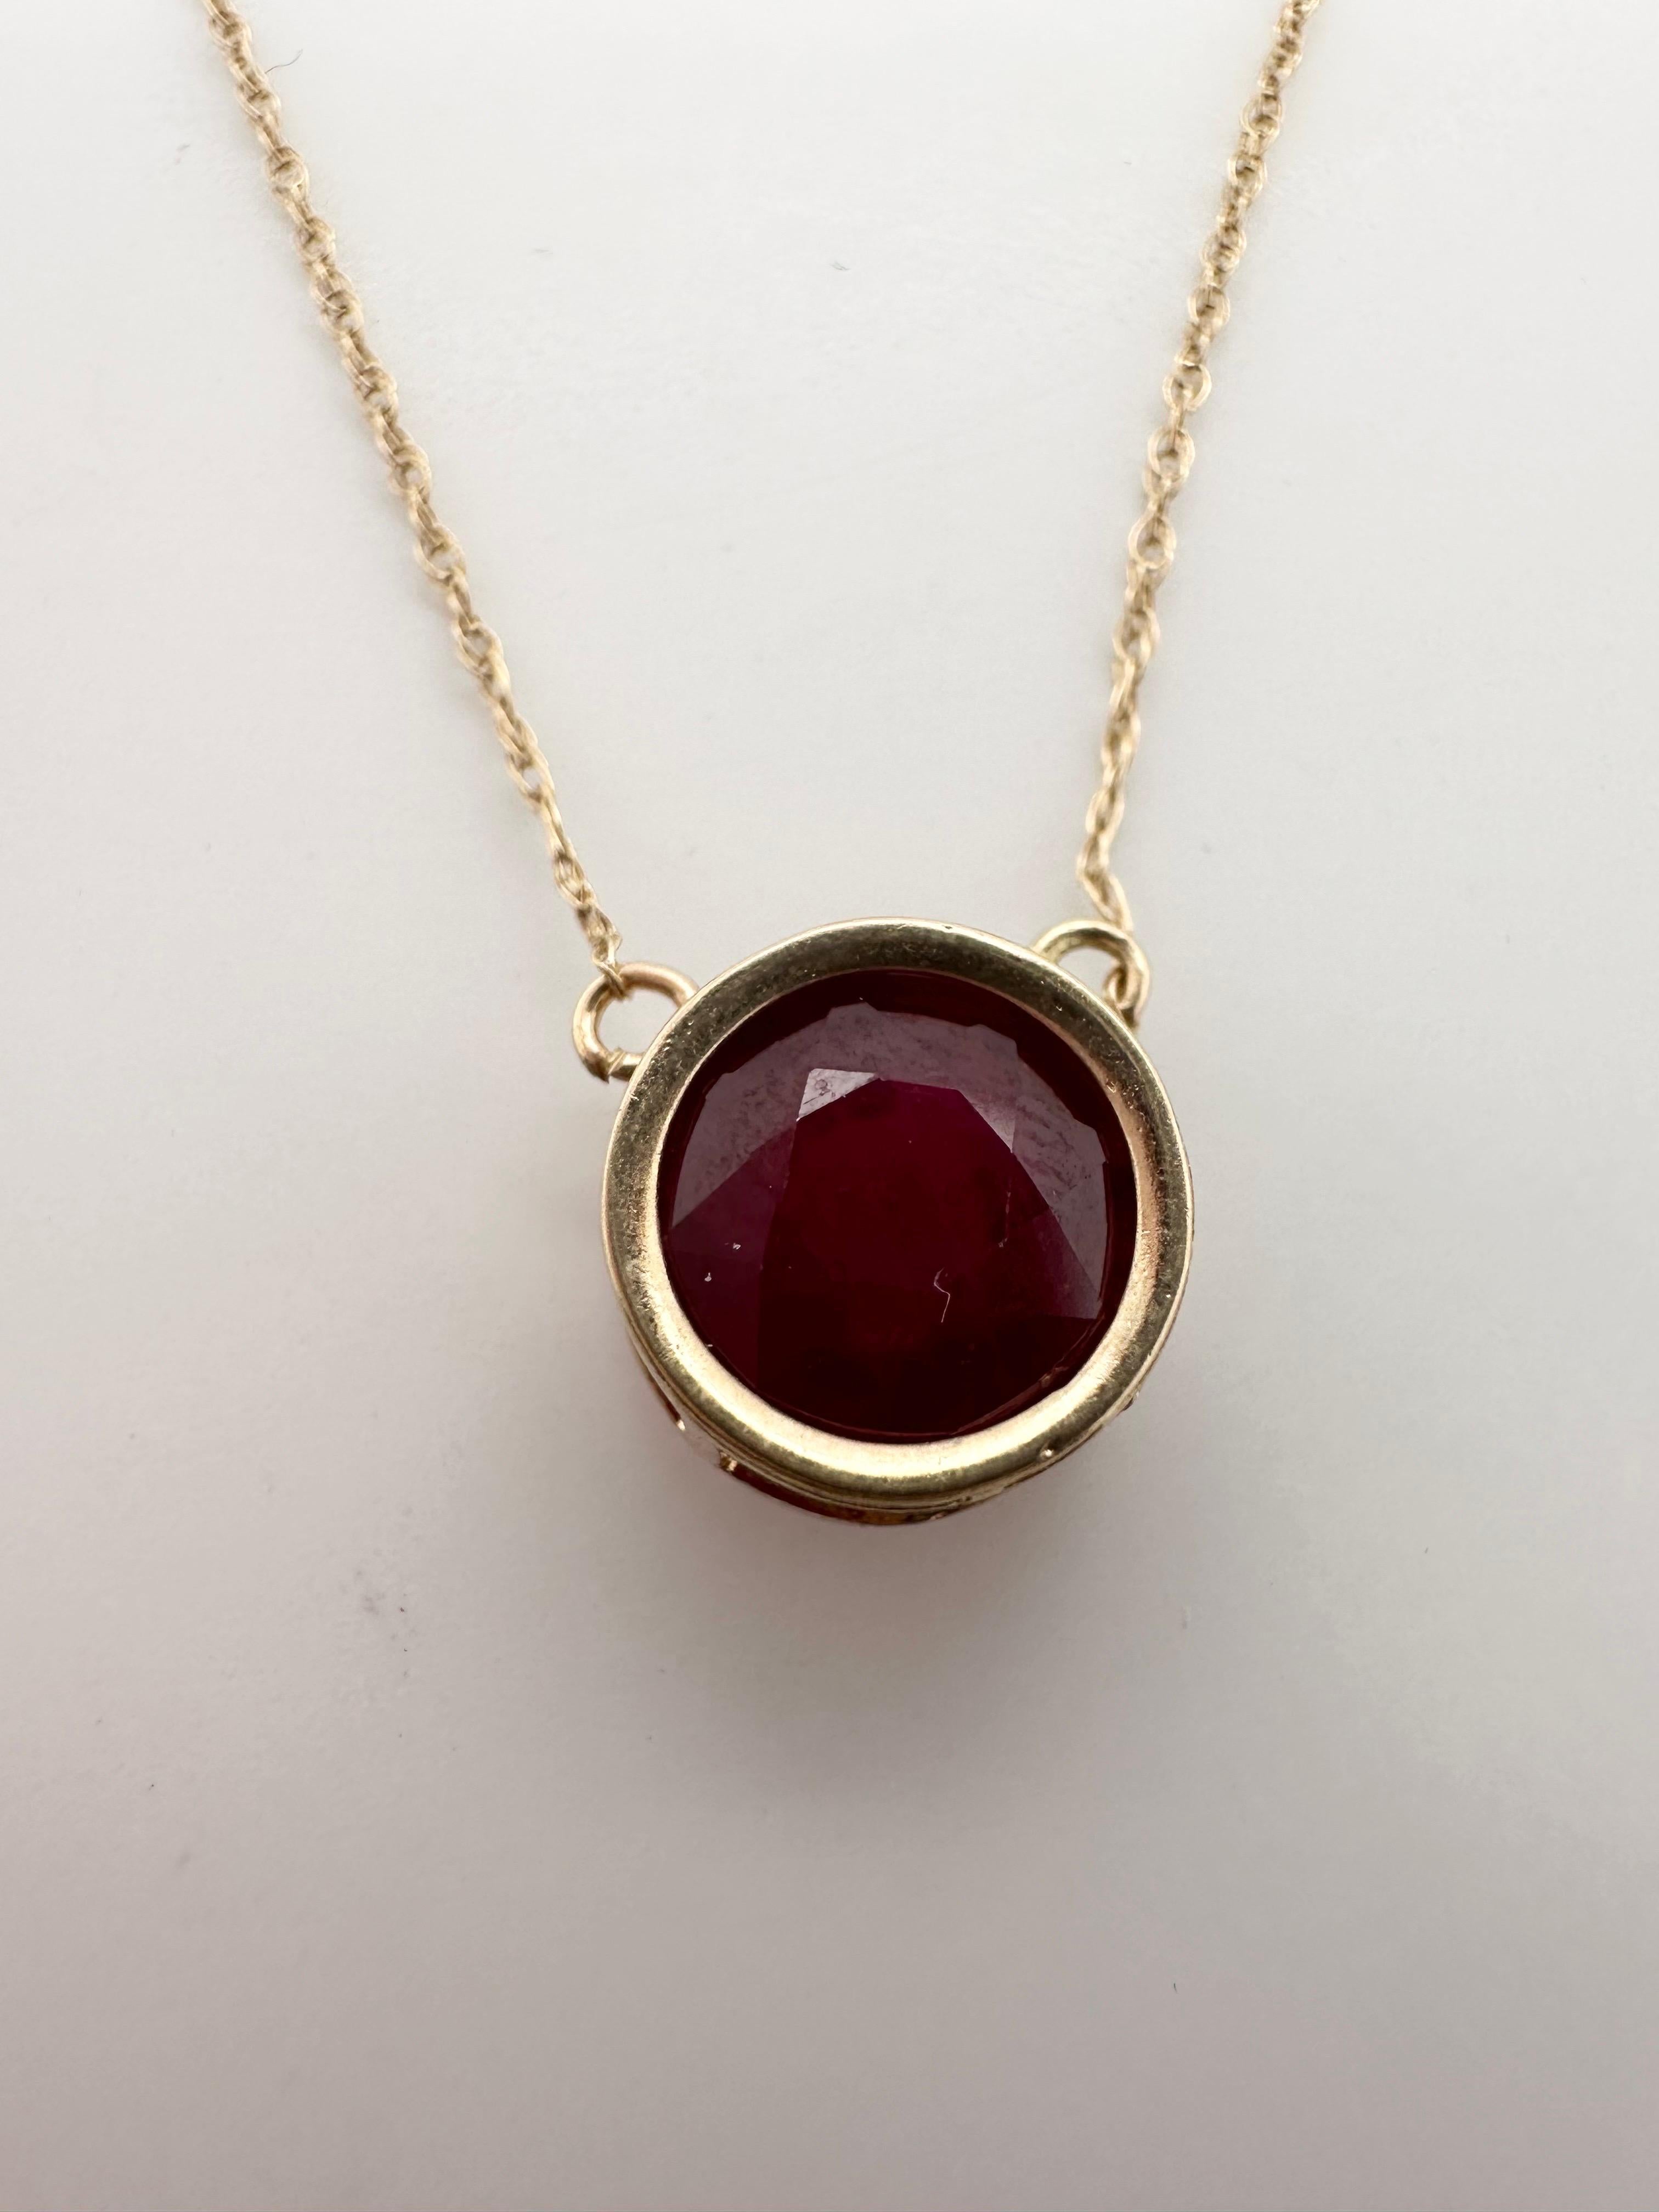 Natural 8mm ruby made in bezel setting in 10KT yellow gold, chain is 17